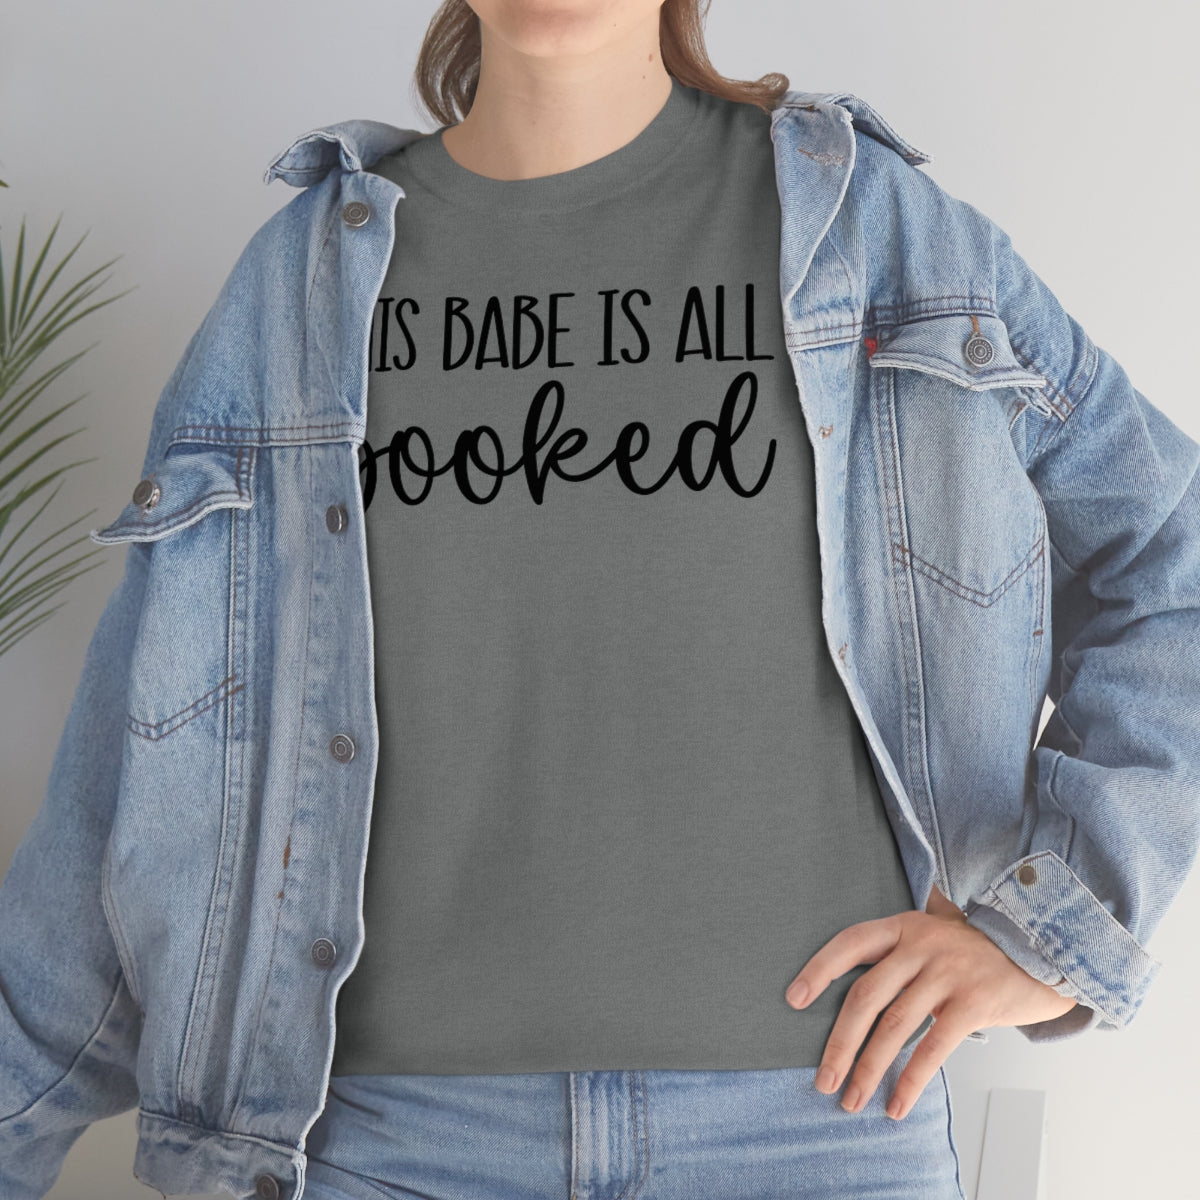 This Babe is all Booked Unisex Heavy Cotton Tee Bookish T Shirt Reader T Shirt Bookish Clothing Trendy T Shirt Readers Apparel